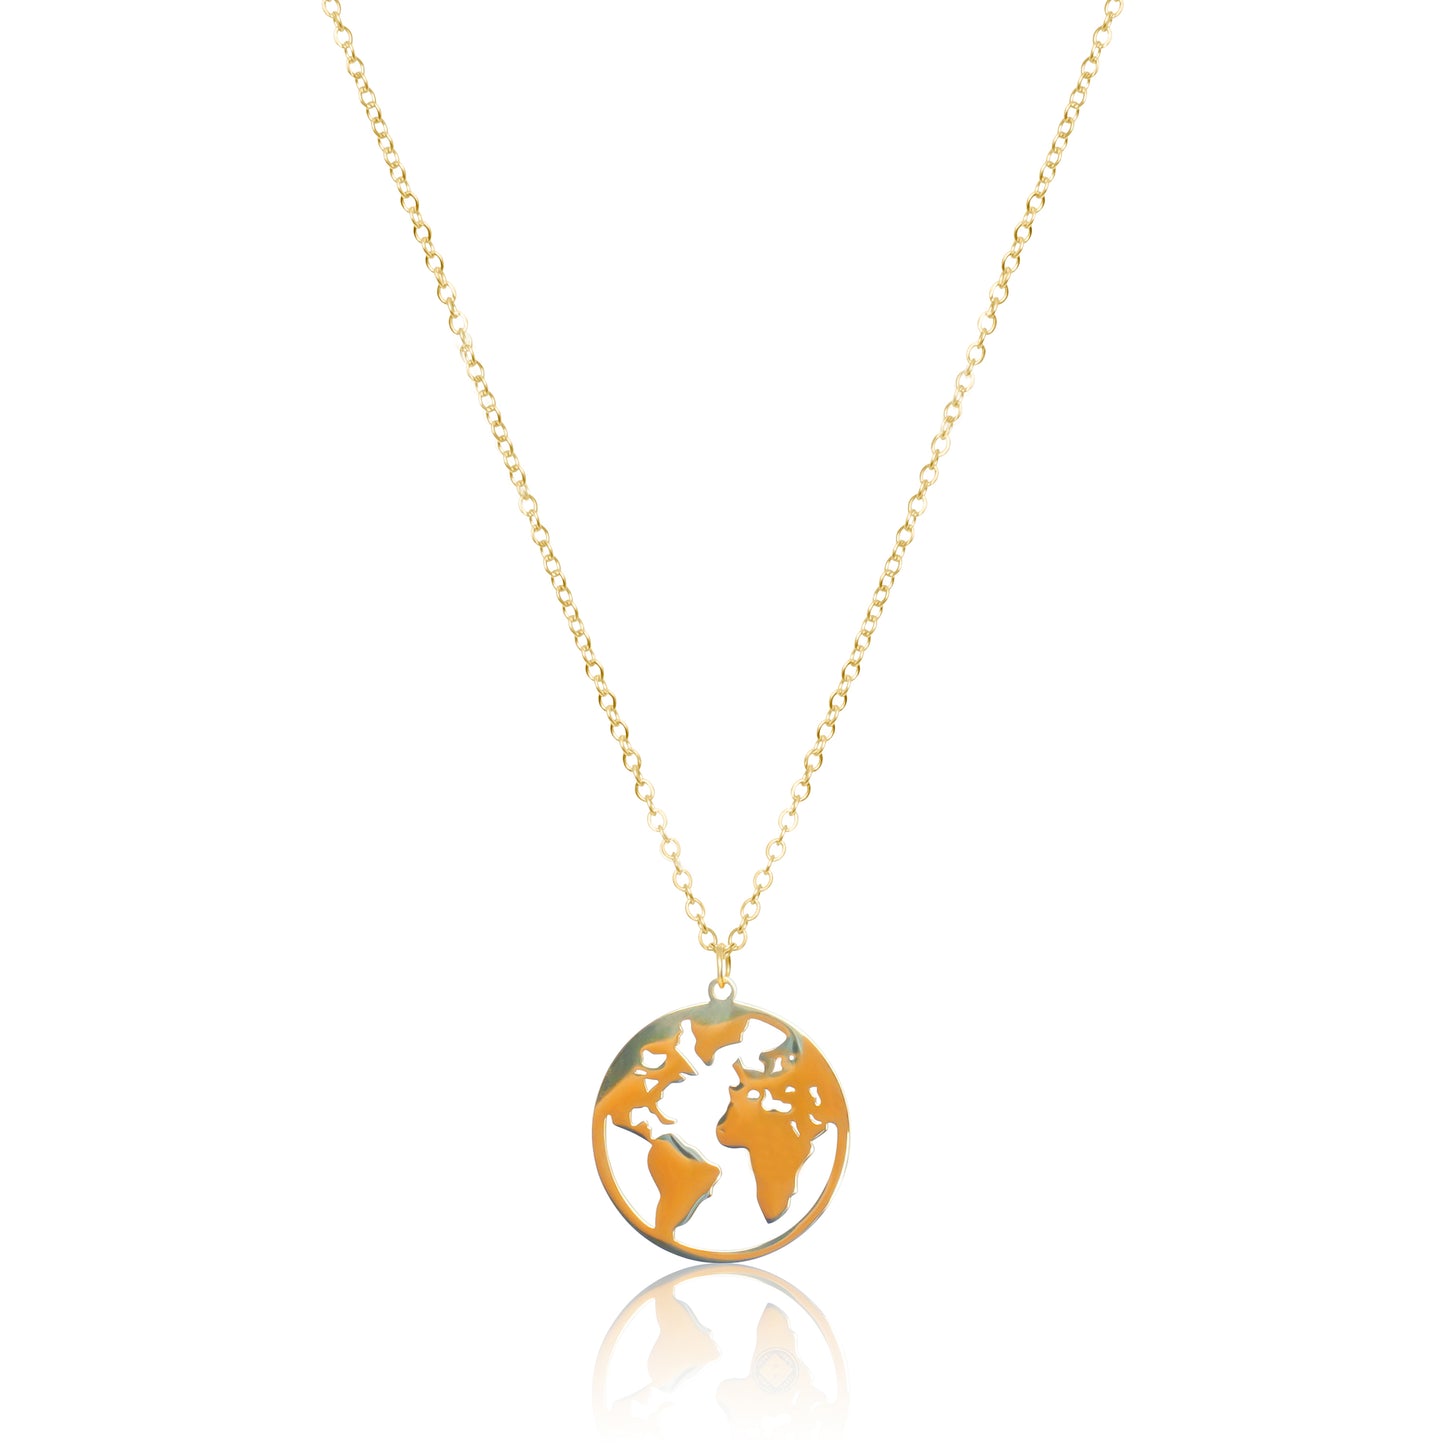 Earth Pendant Necklace - Silver / Gold